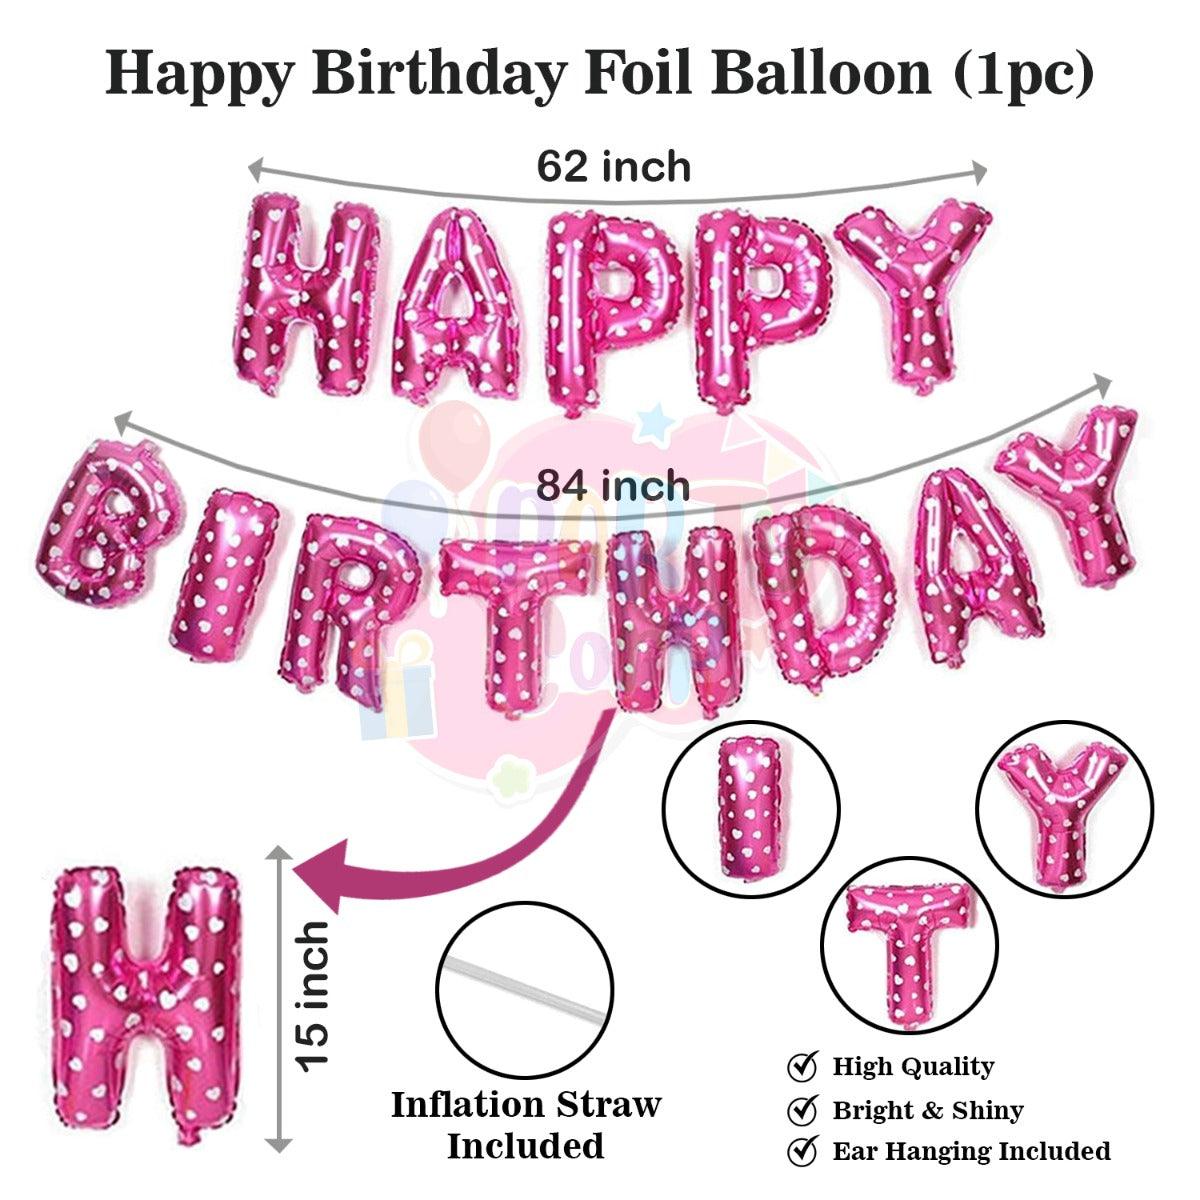 PartyCorp Happy Birthday Decoration Kit Combo 40 Pcs - Pink & White Latex & Pink Confetti Balloon, Pink Happy Birthday Foil Banner